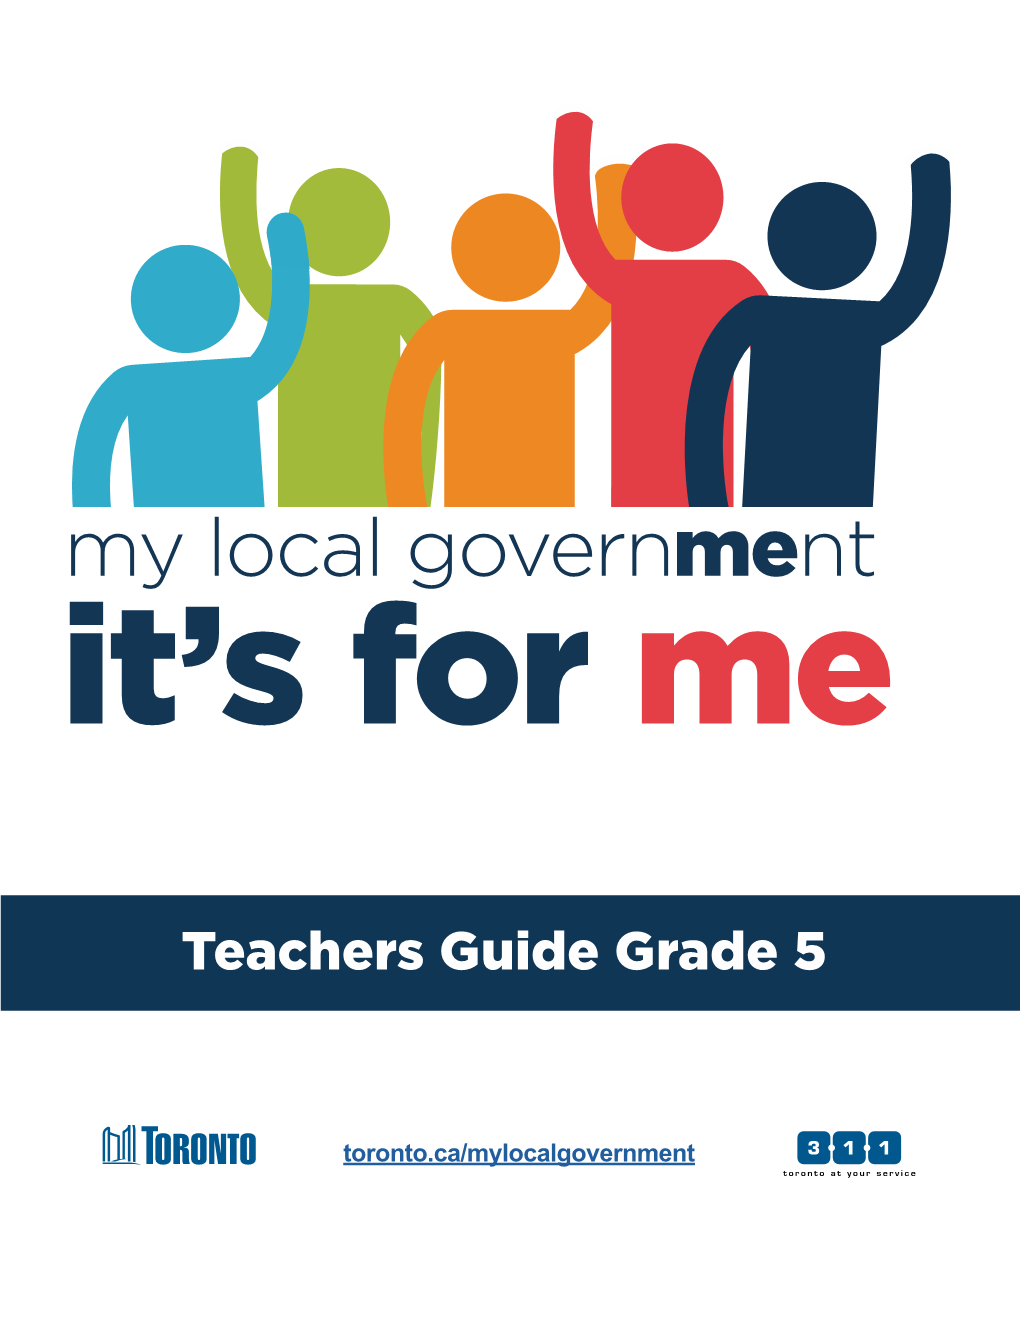 Grade 5 Teachers Guide Was Originally Written by Jessica Roher and Christopher Chipman